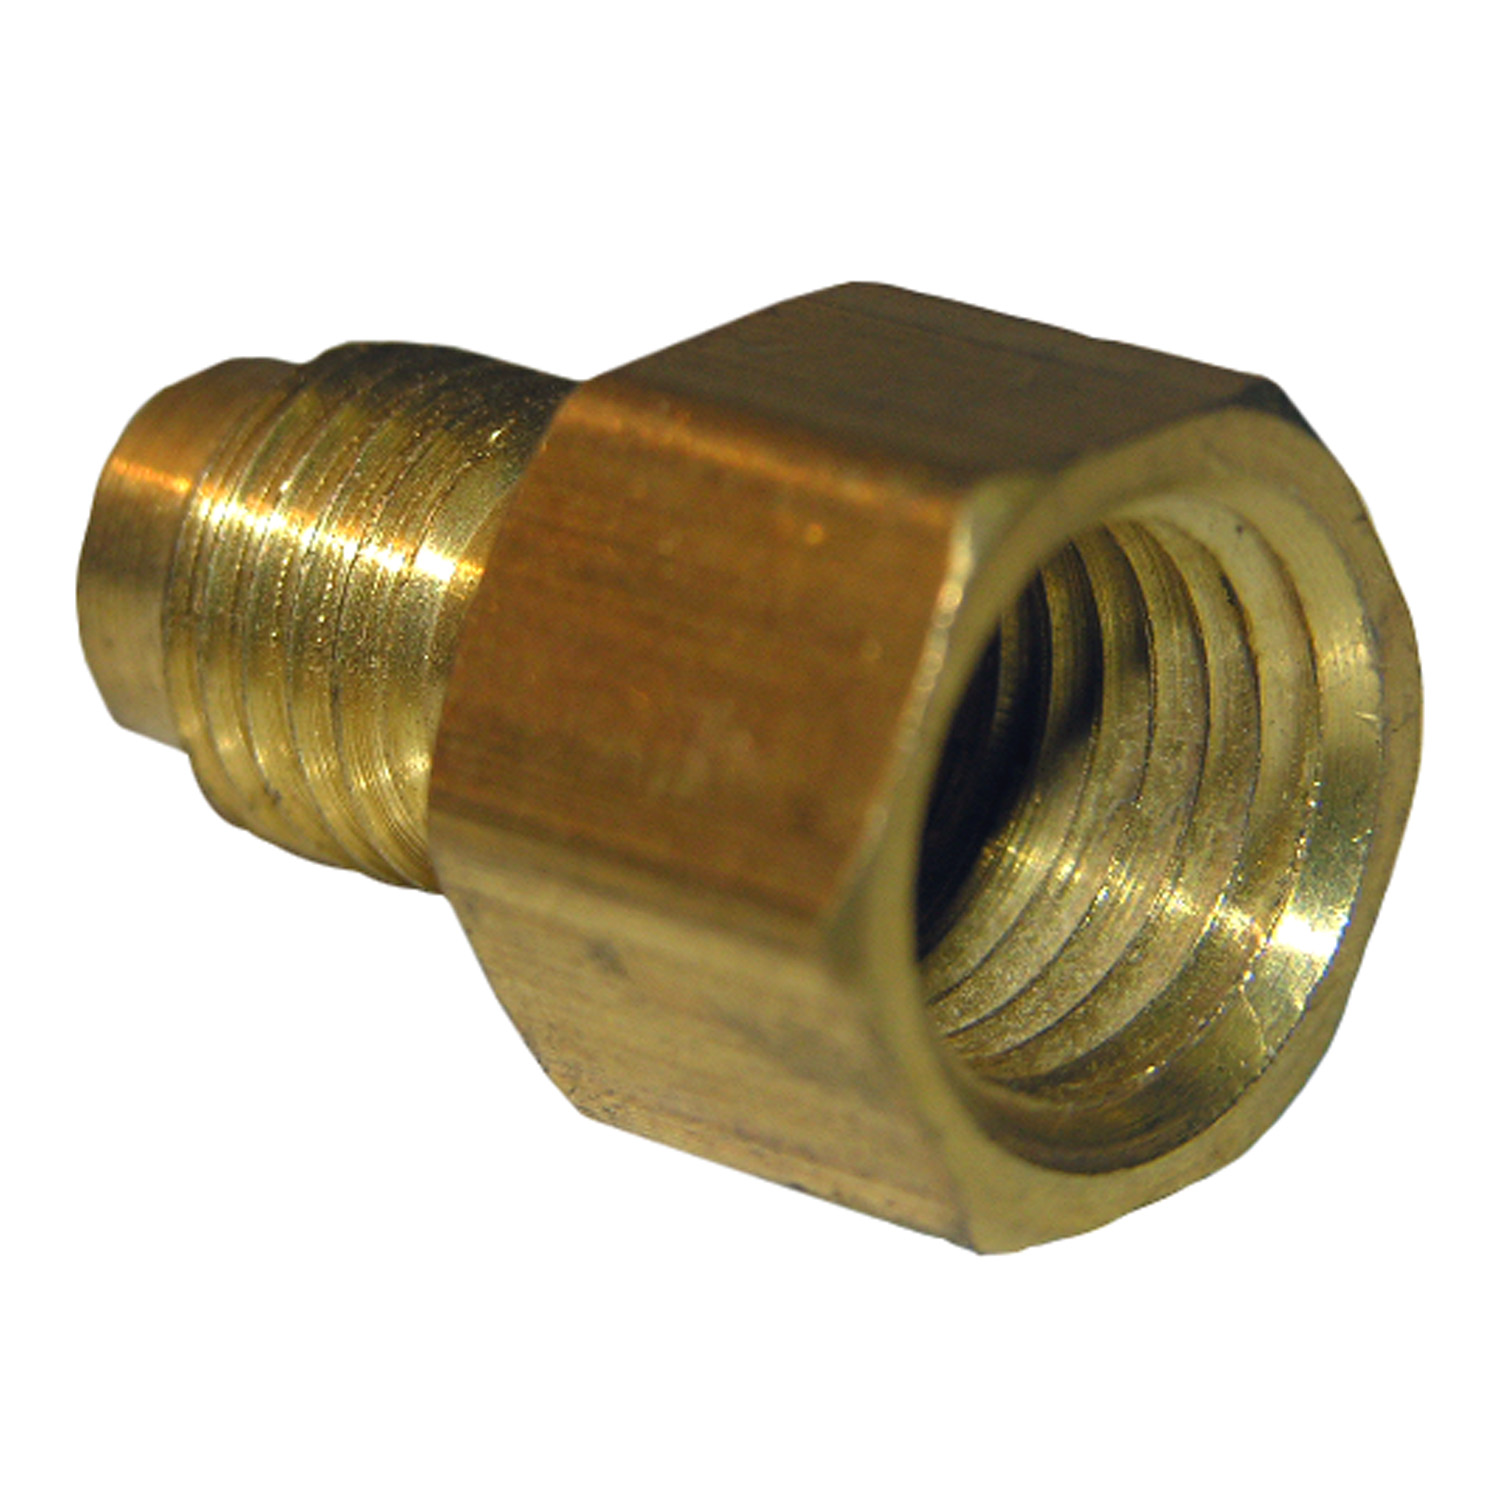 17-4613 Pipe Adapter, 1/4 x 3/8 in, Male Flare x FPT, Brass, 1400 psi Pressure